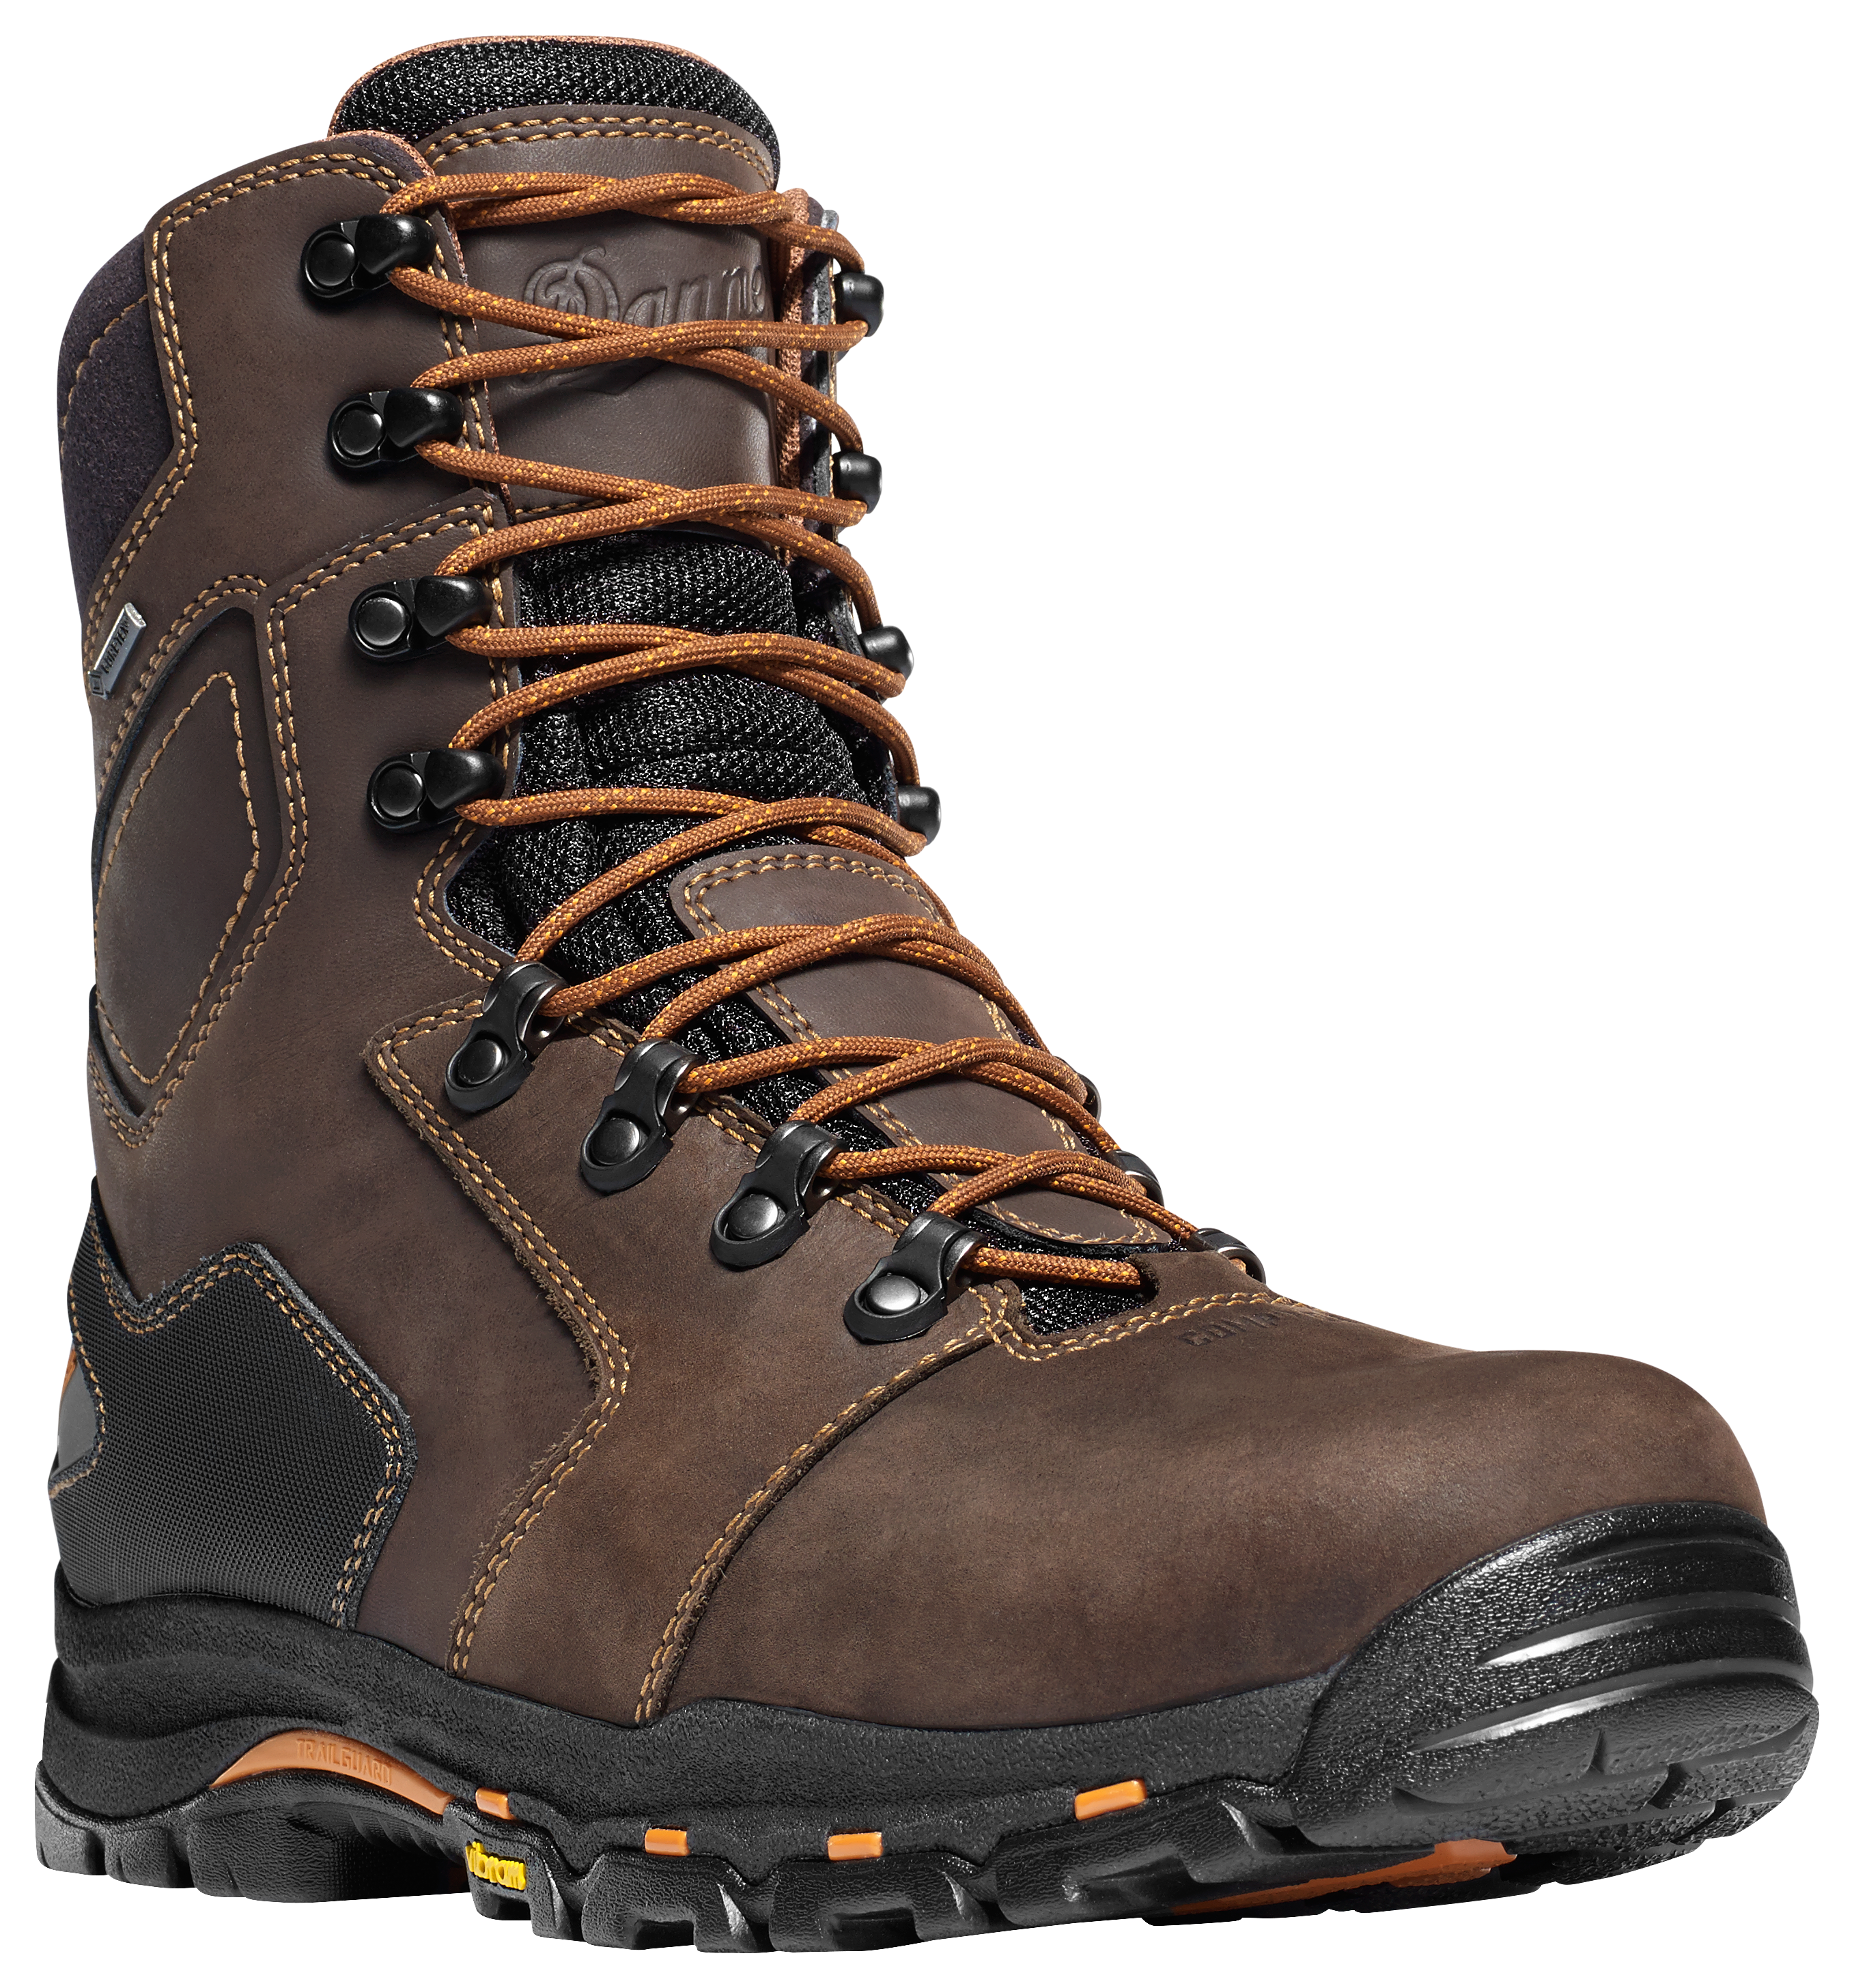 Danner Vicious GORE-TEX Composite Toe Work Boots for Men - Brown - 8.5W